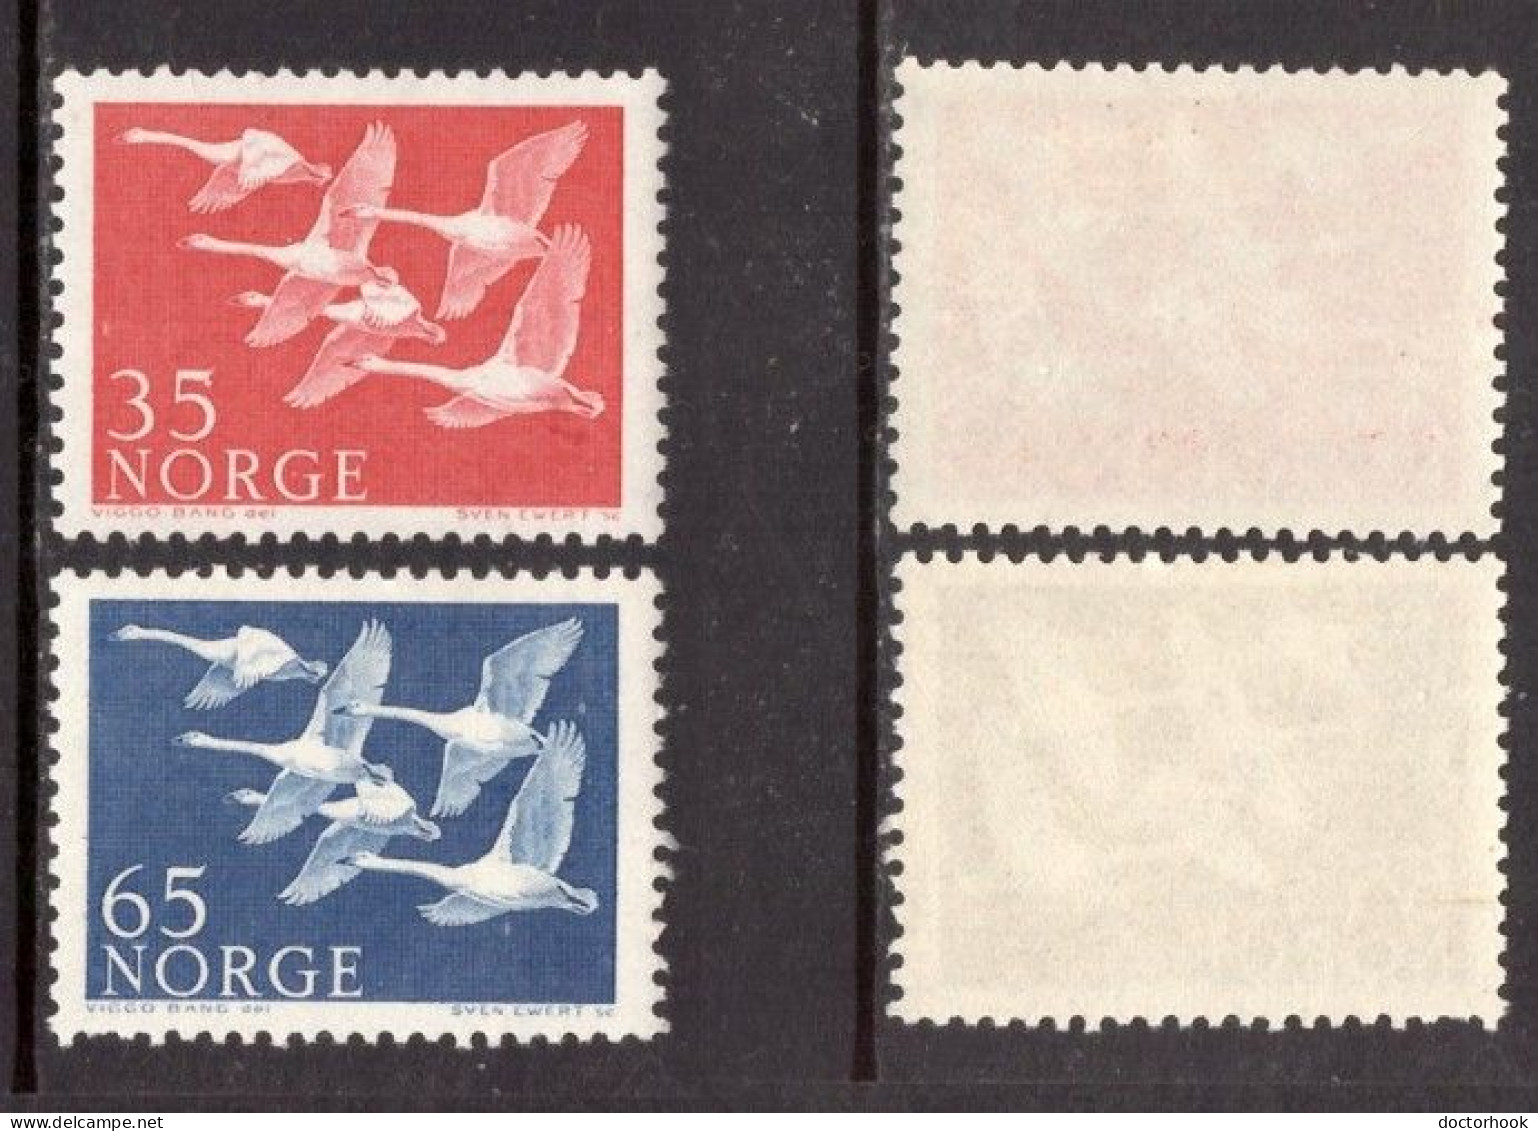 NORWAY   Scott # 353-4* MINT LH (CONDITION AS PER SCAN) (Stamp Scan # 978-19) - Unused Stamps